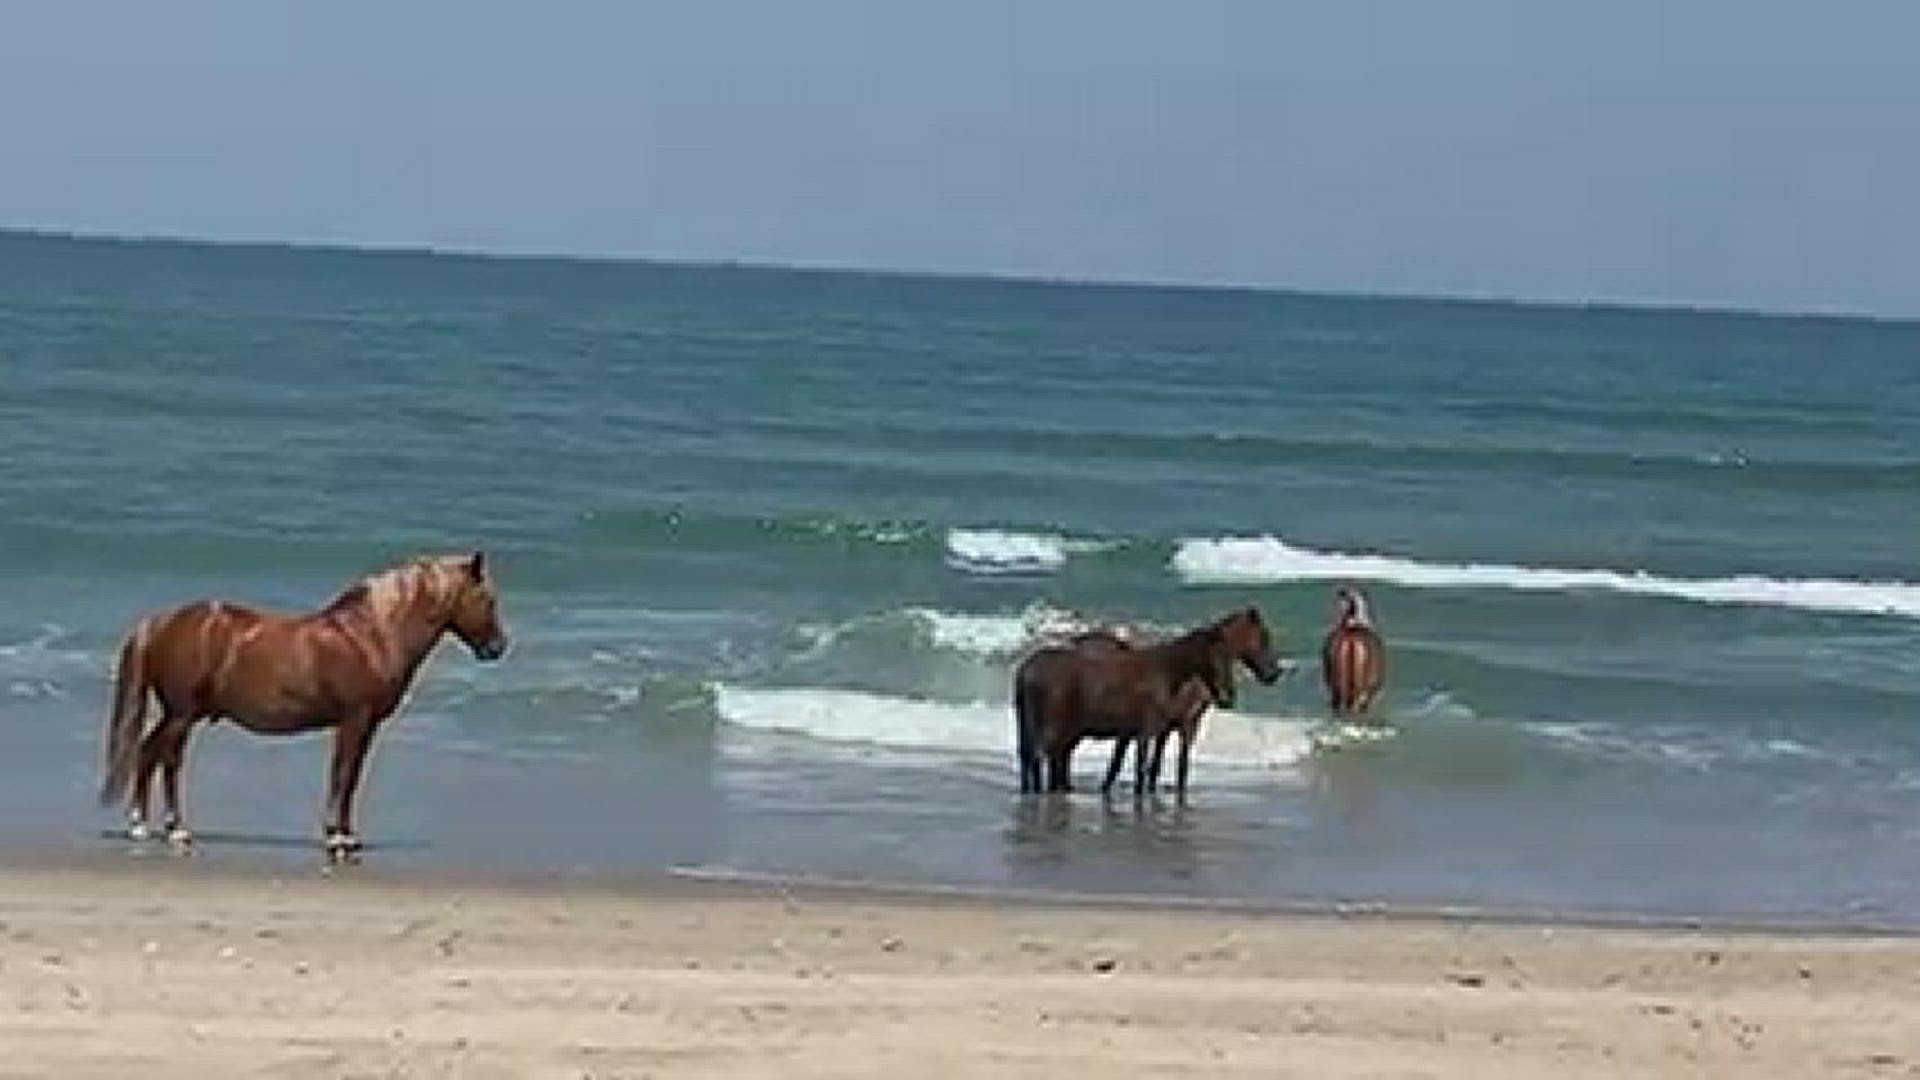 Some days, it gets hot enough on the beach that even the horses decide to go for a swim! Video credit: Corolla Wild Horse Fund